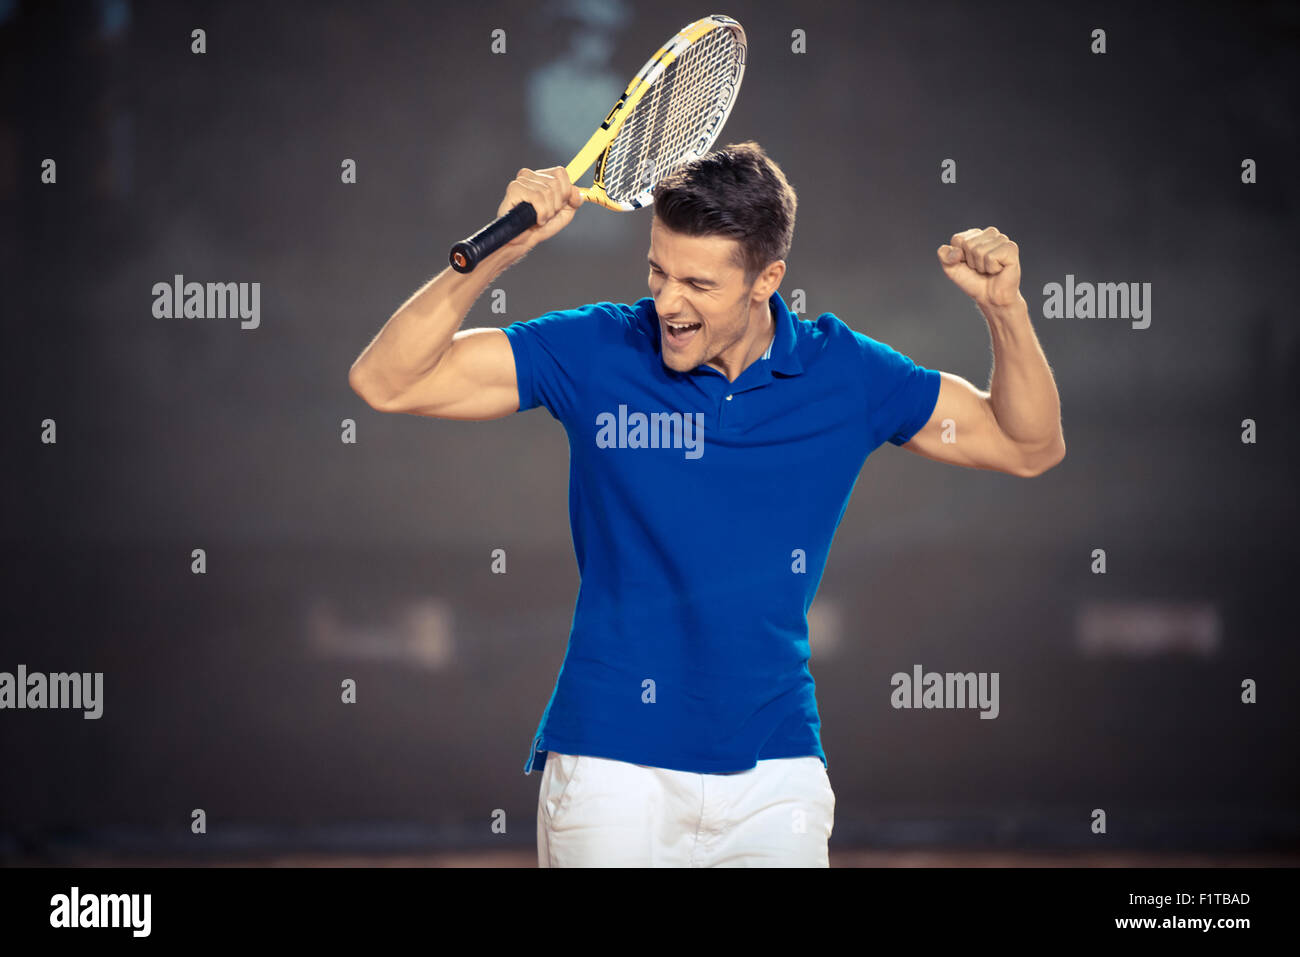 Portrait of a male tennis player celebrating his victory Stock Photo